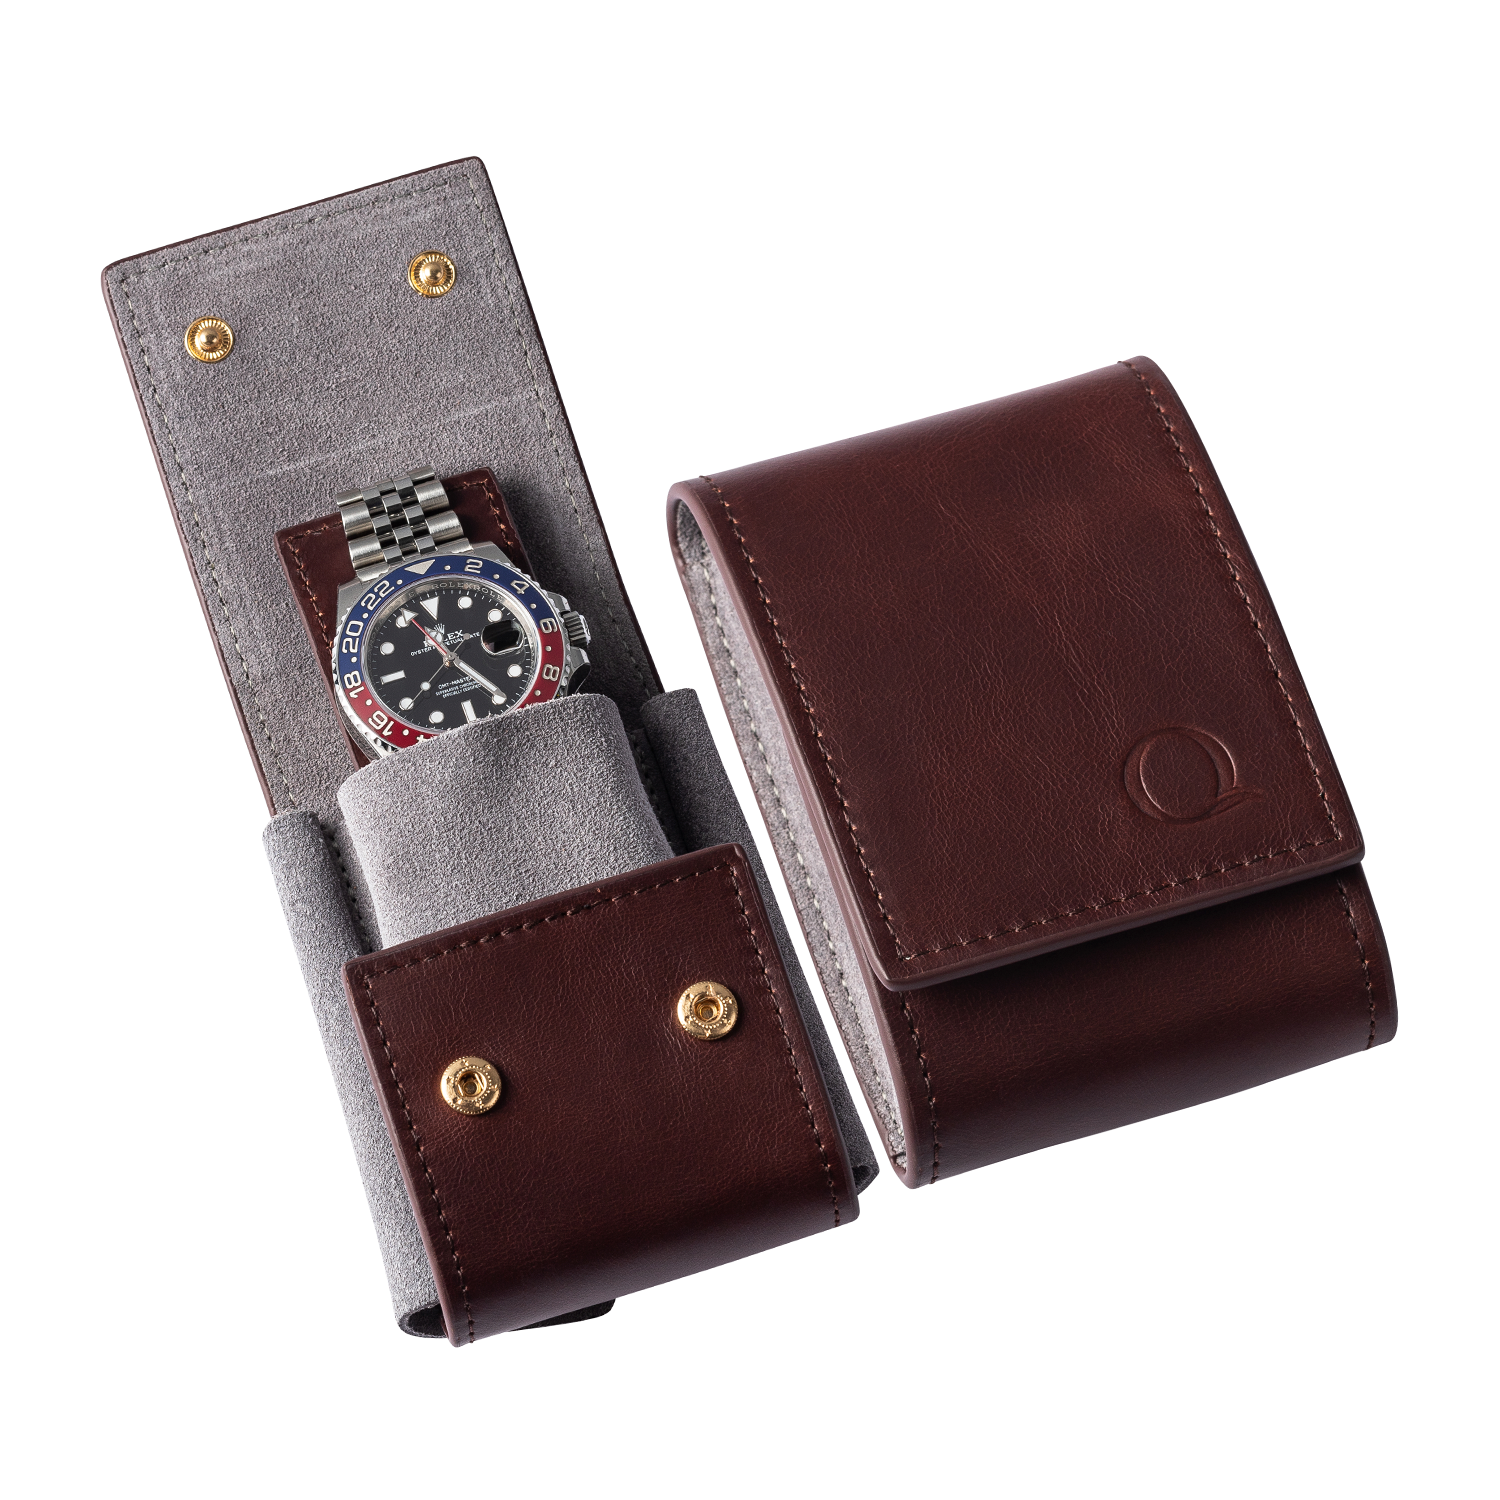 Leather Watch Pouch [Corporate Gift] - Hides and Thread